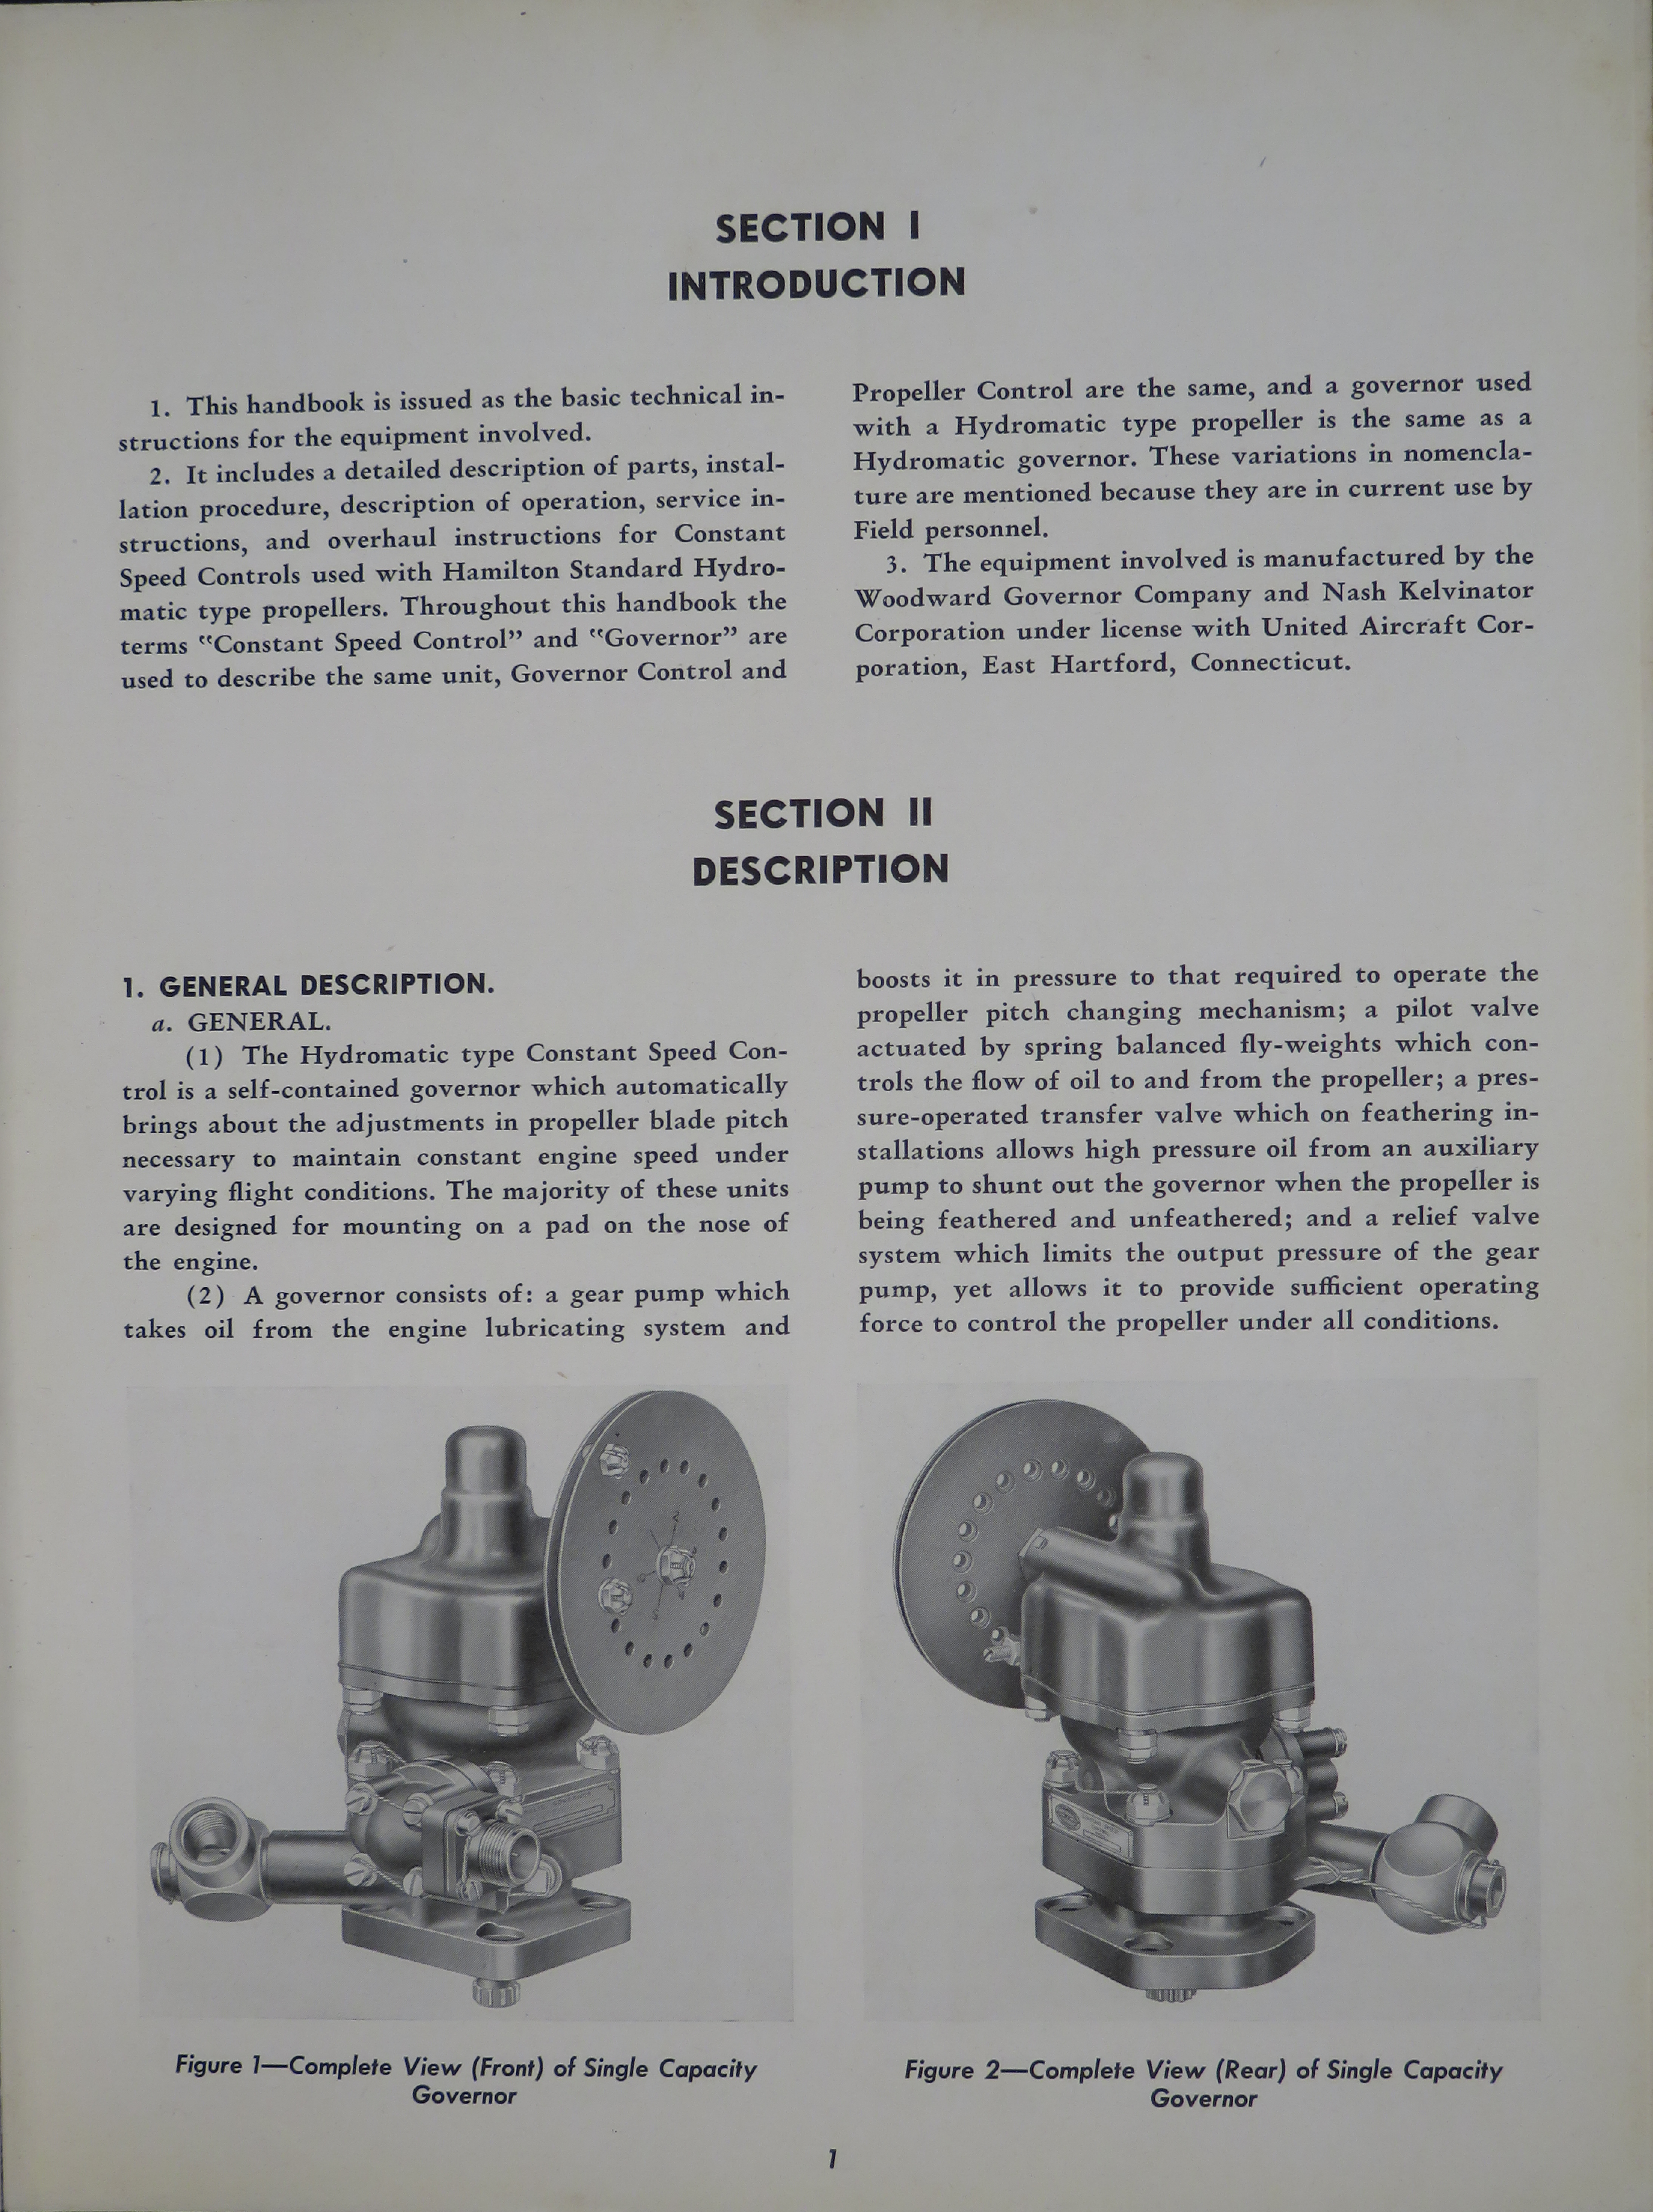 Sample page 7 from AirCorps Library document: Service Manual for Hydromatic Propeller Governors